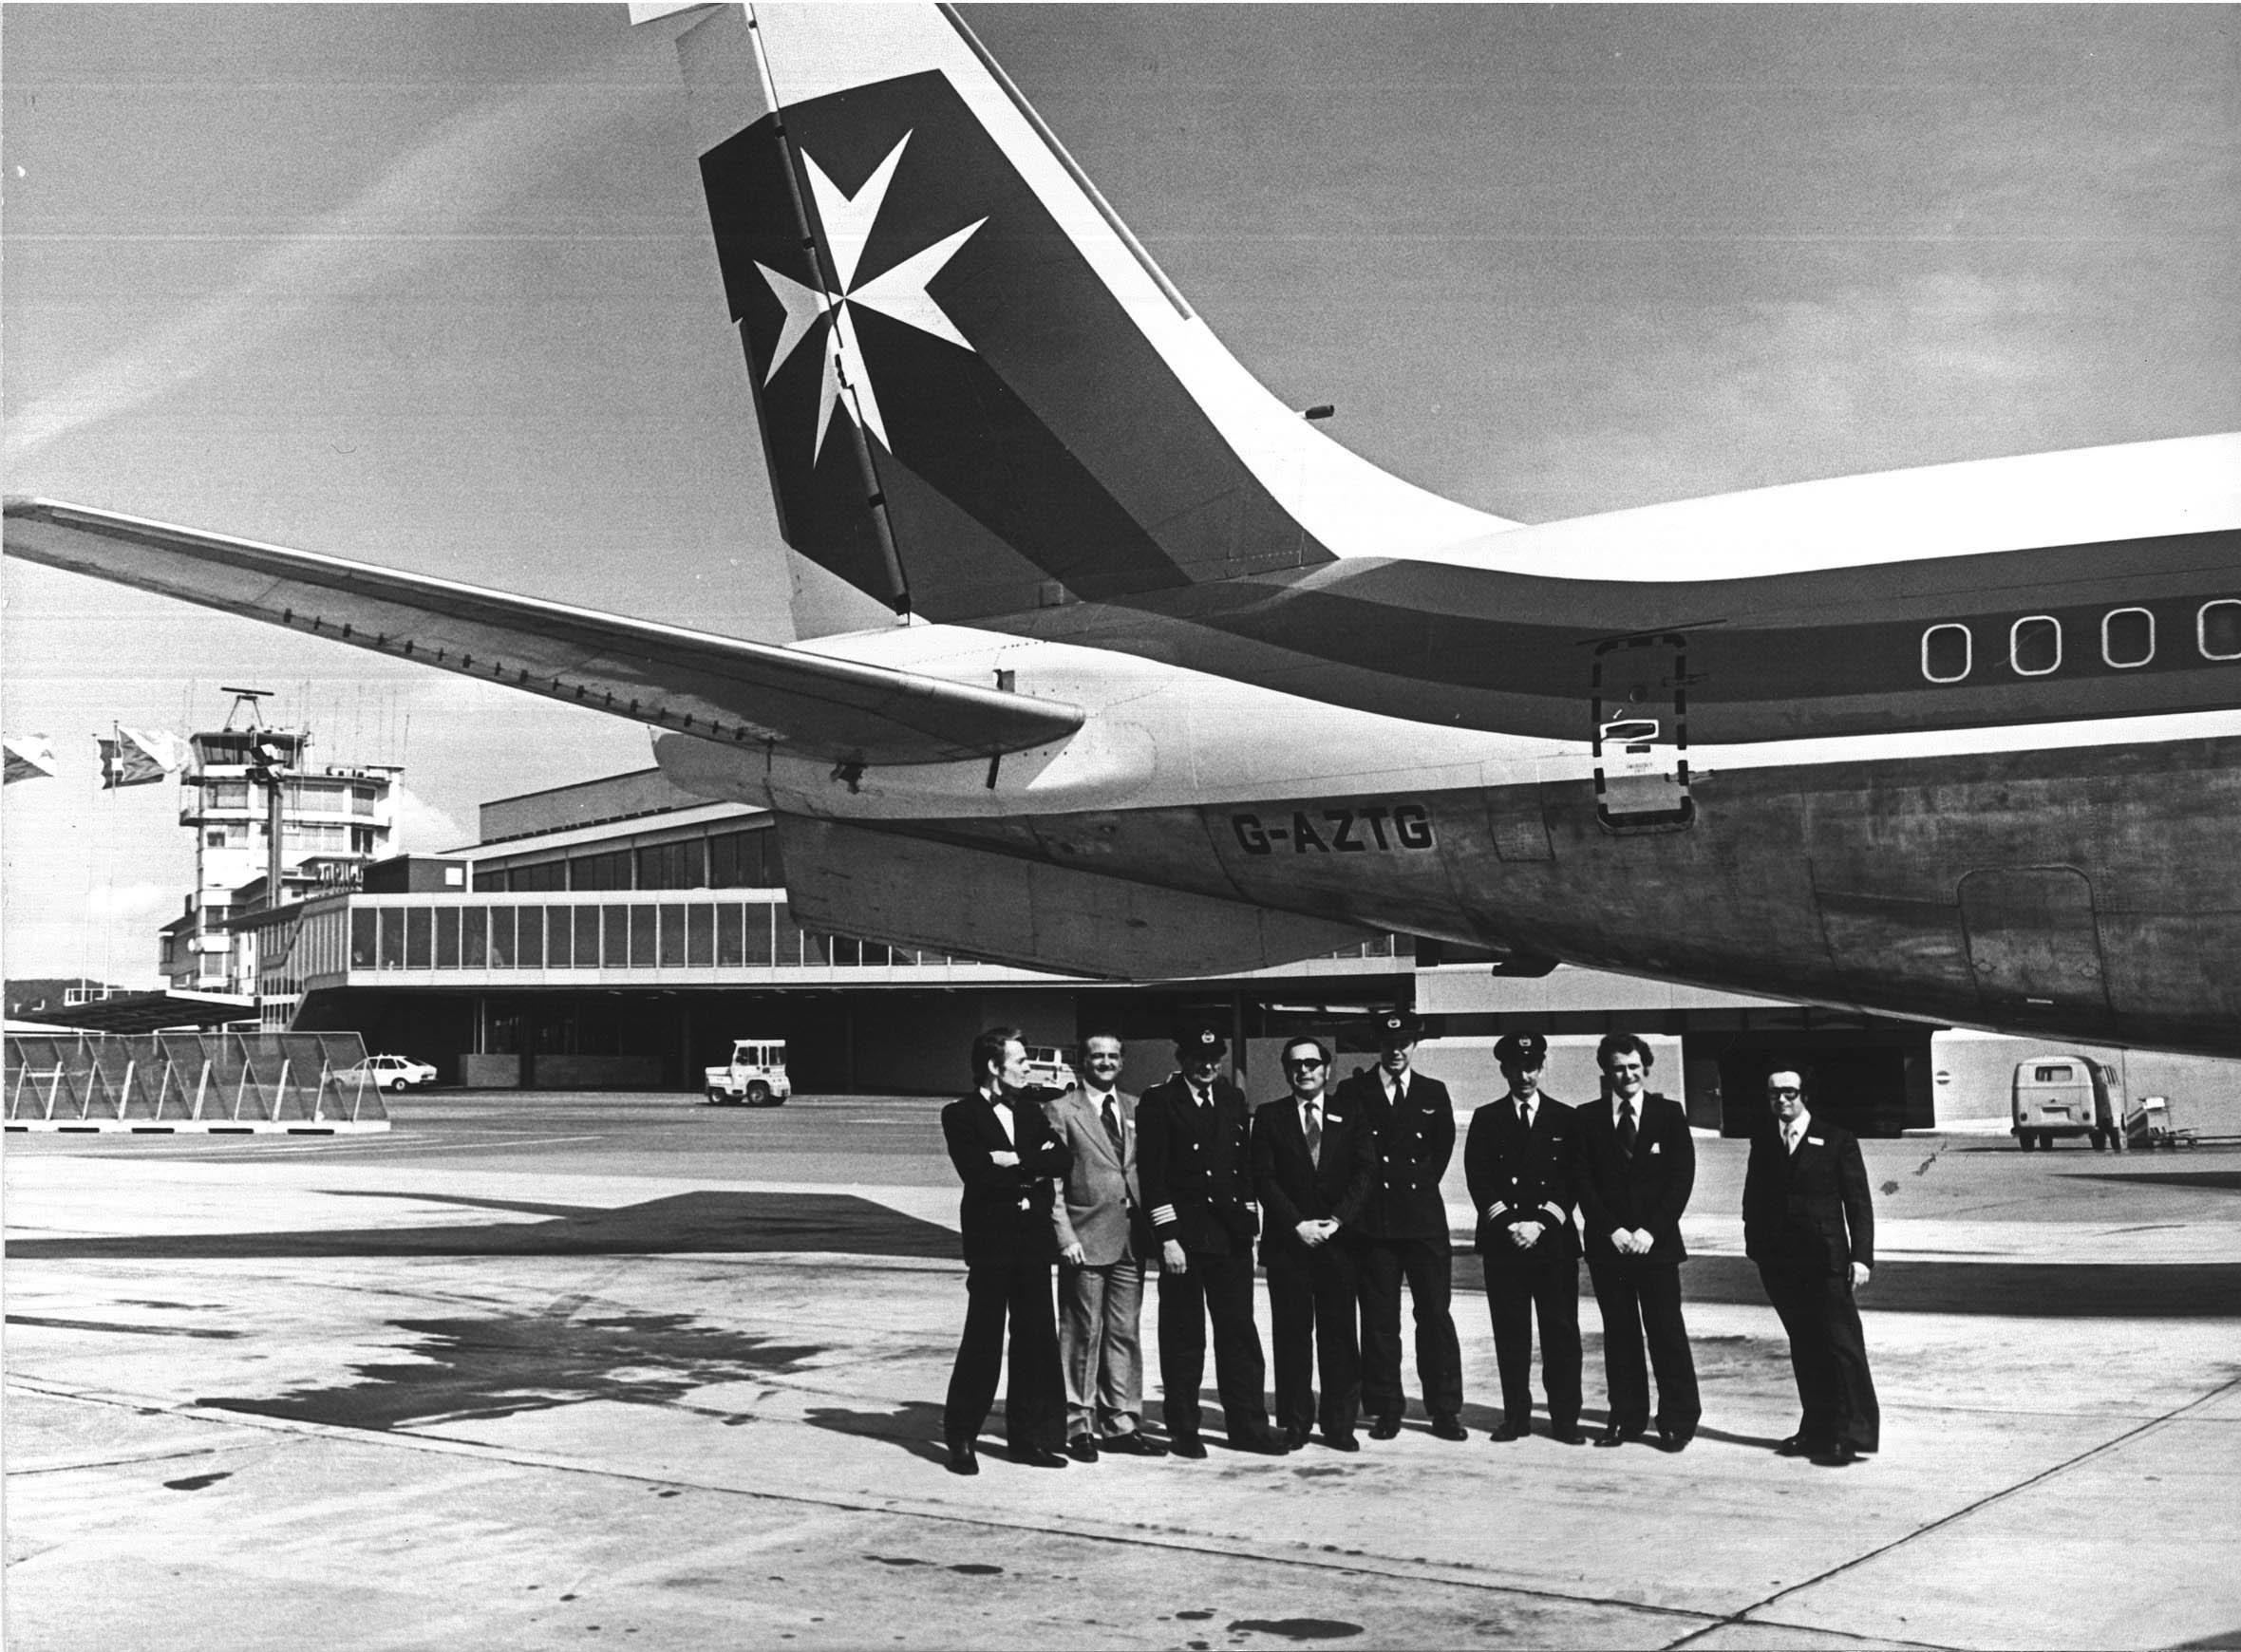 Air Malta celebrates 45 years since its first flight to financial hub of Zurich